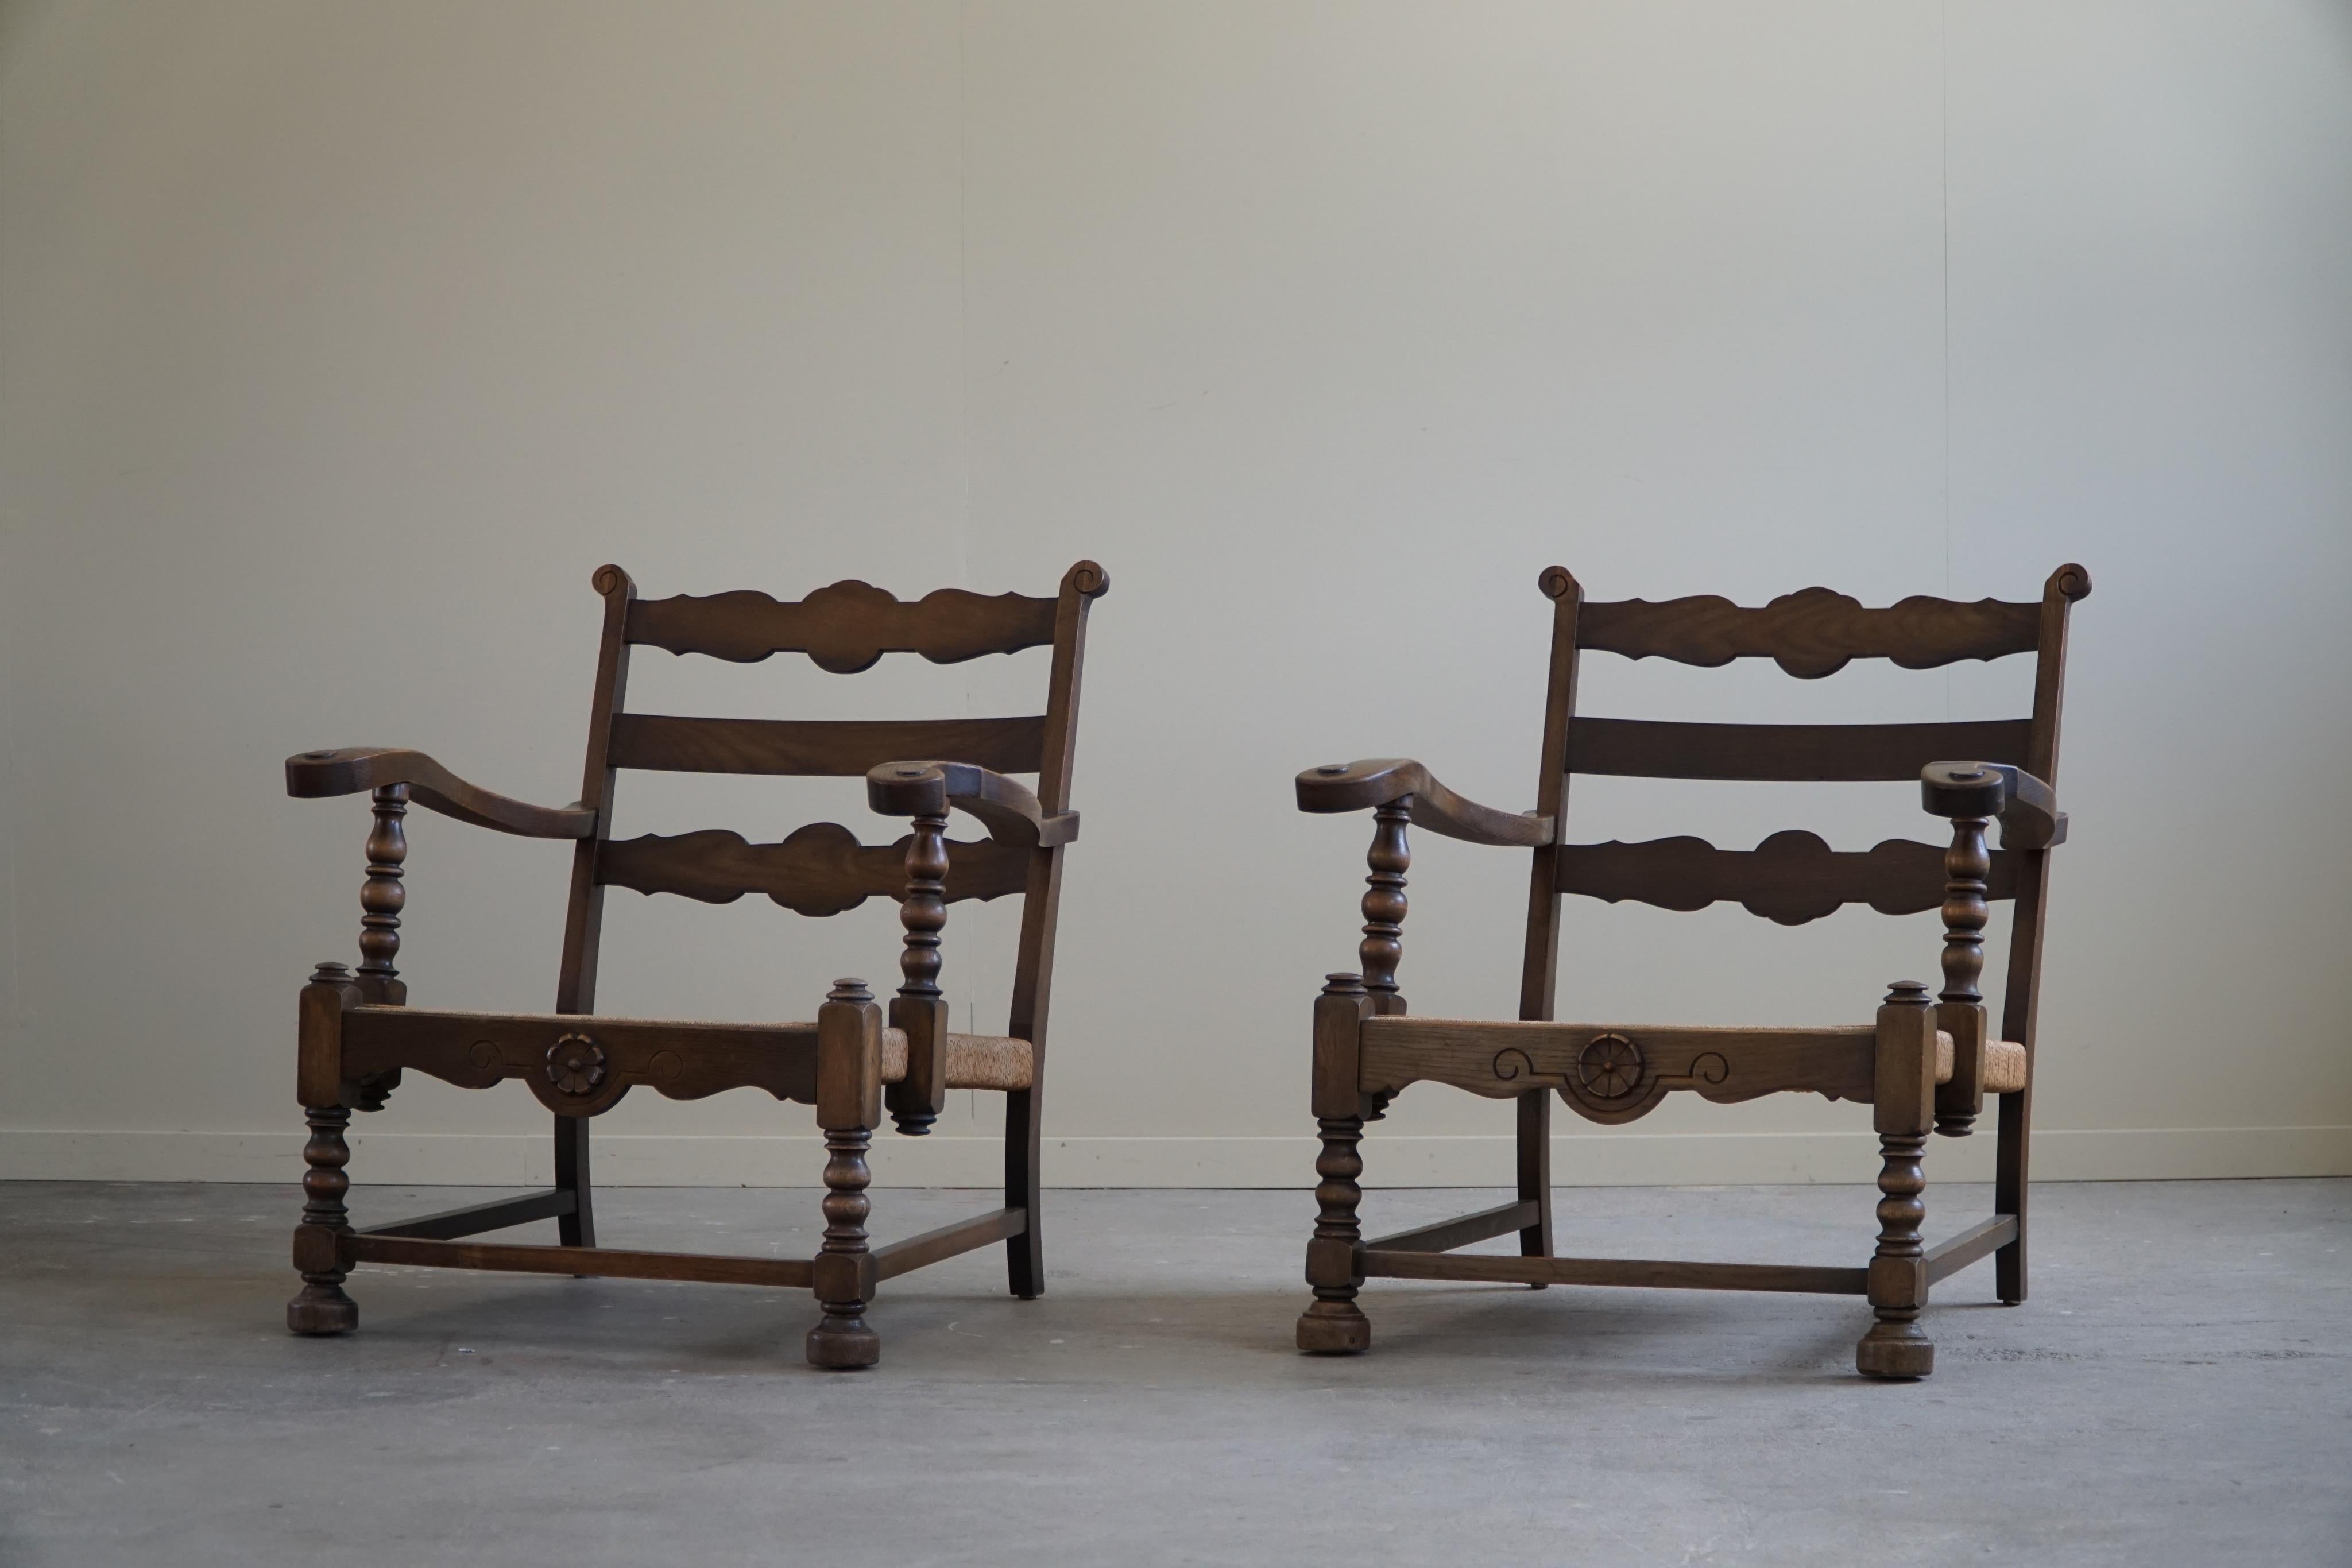 A Pair of Danish Modern, Sculptural Vintage Armchair in Oak and Papercord, 1940s For Sale 10